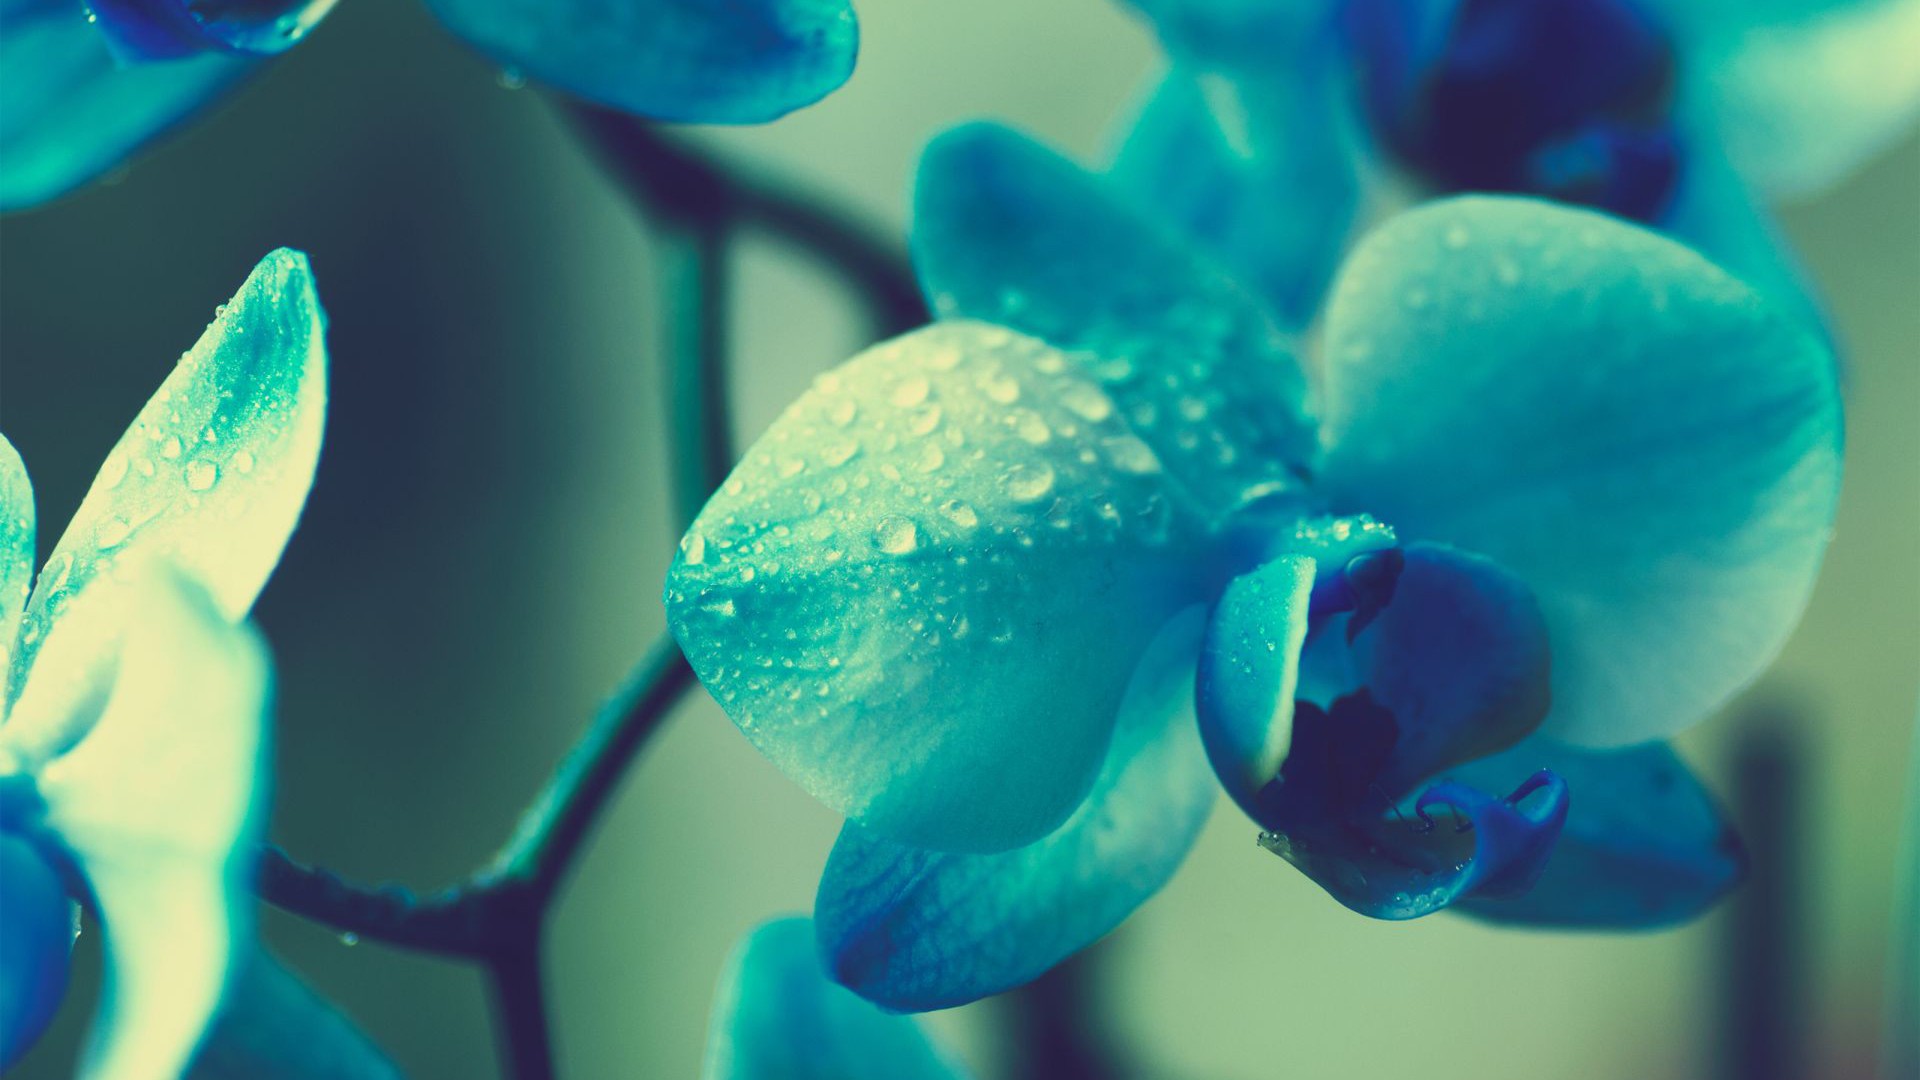 General 1920x1080 flowers blue plants macro orchids blue flowers water drops turquoise filter